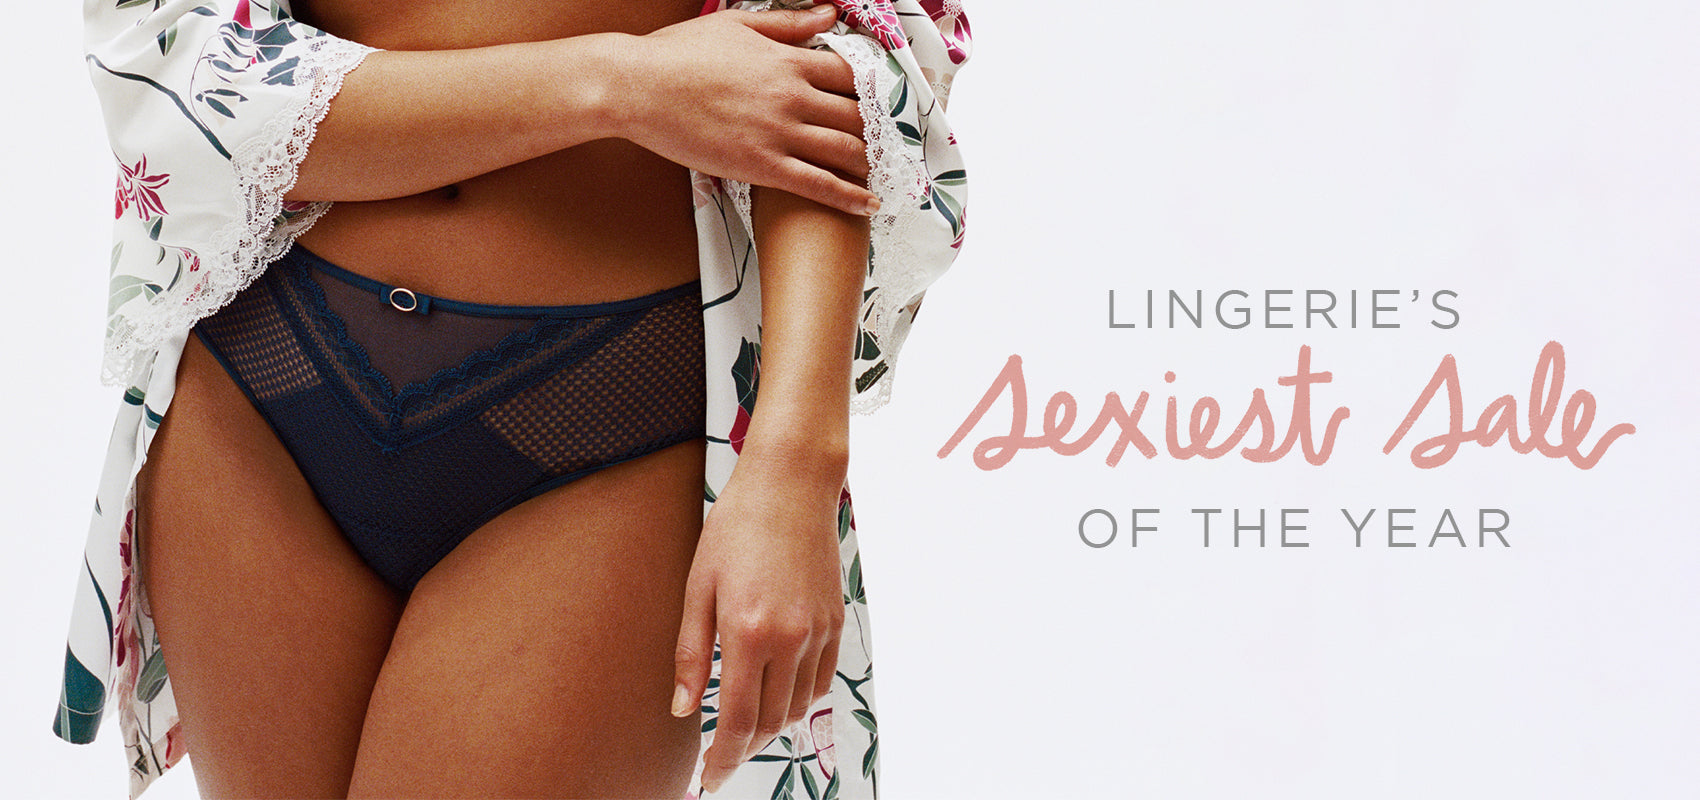 Lingerie’s Sexiest Sale of the Year